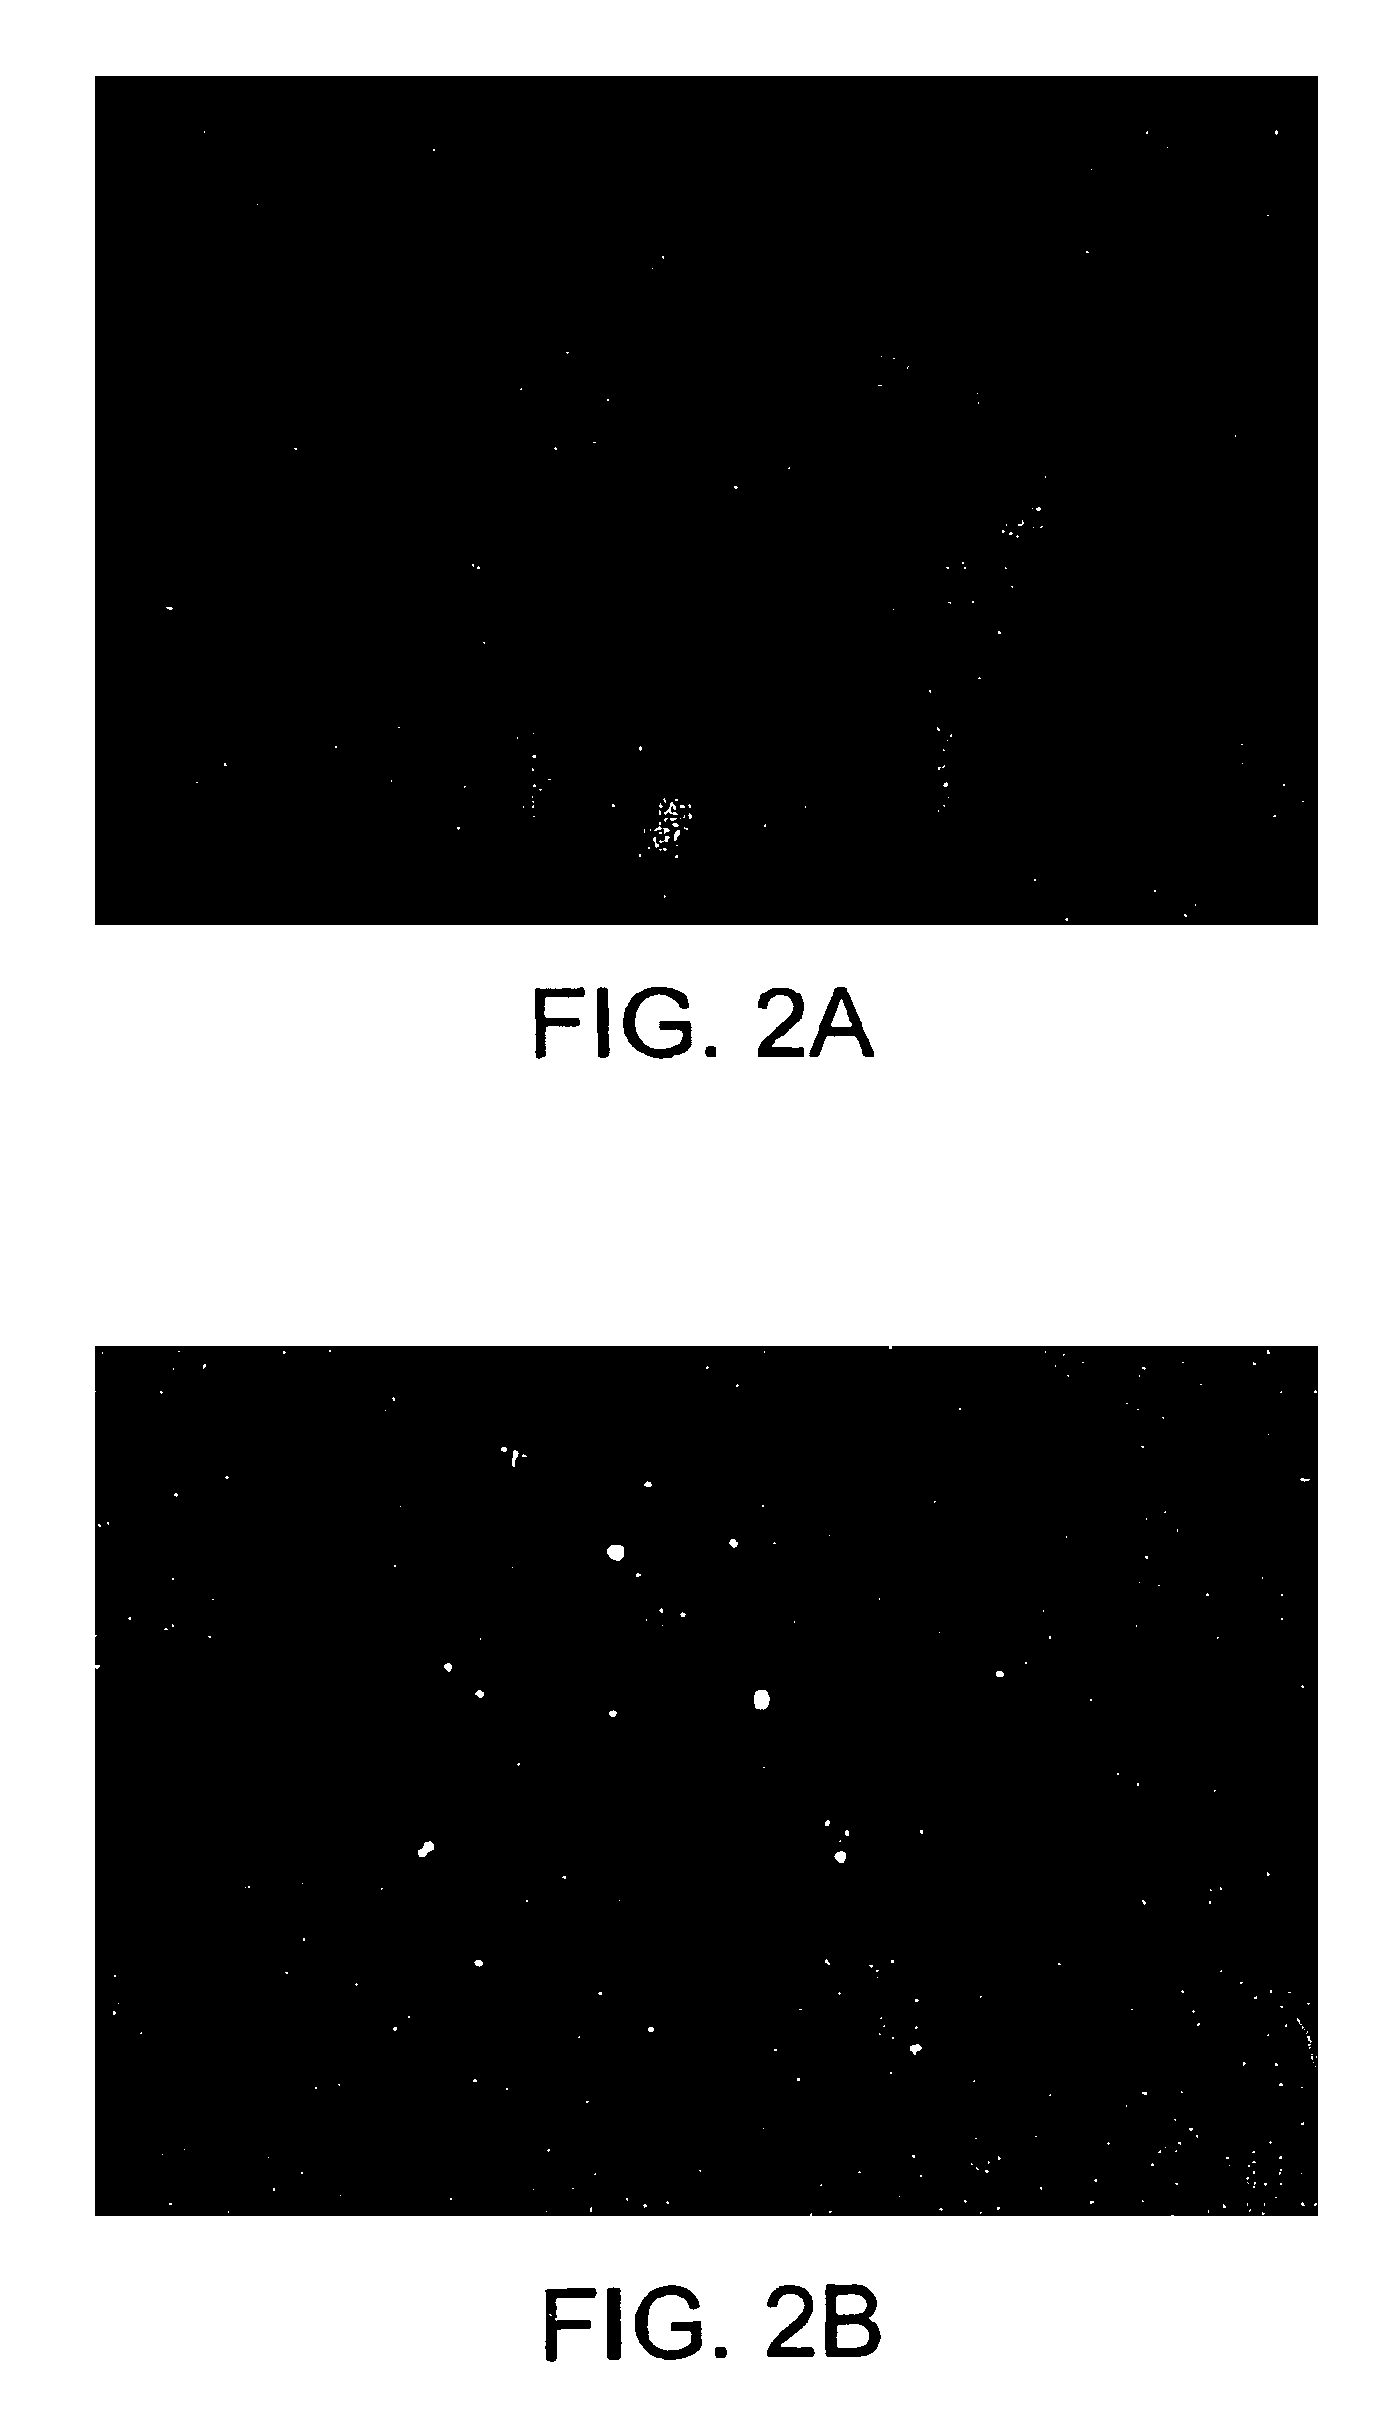 Methods of staining target chromosomal DNA employing high complexity nucleic acid probes